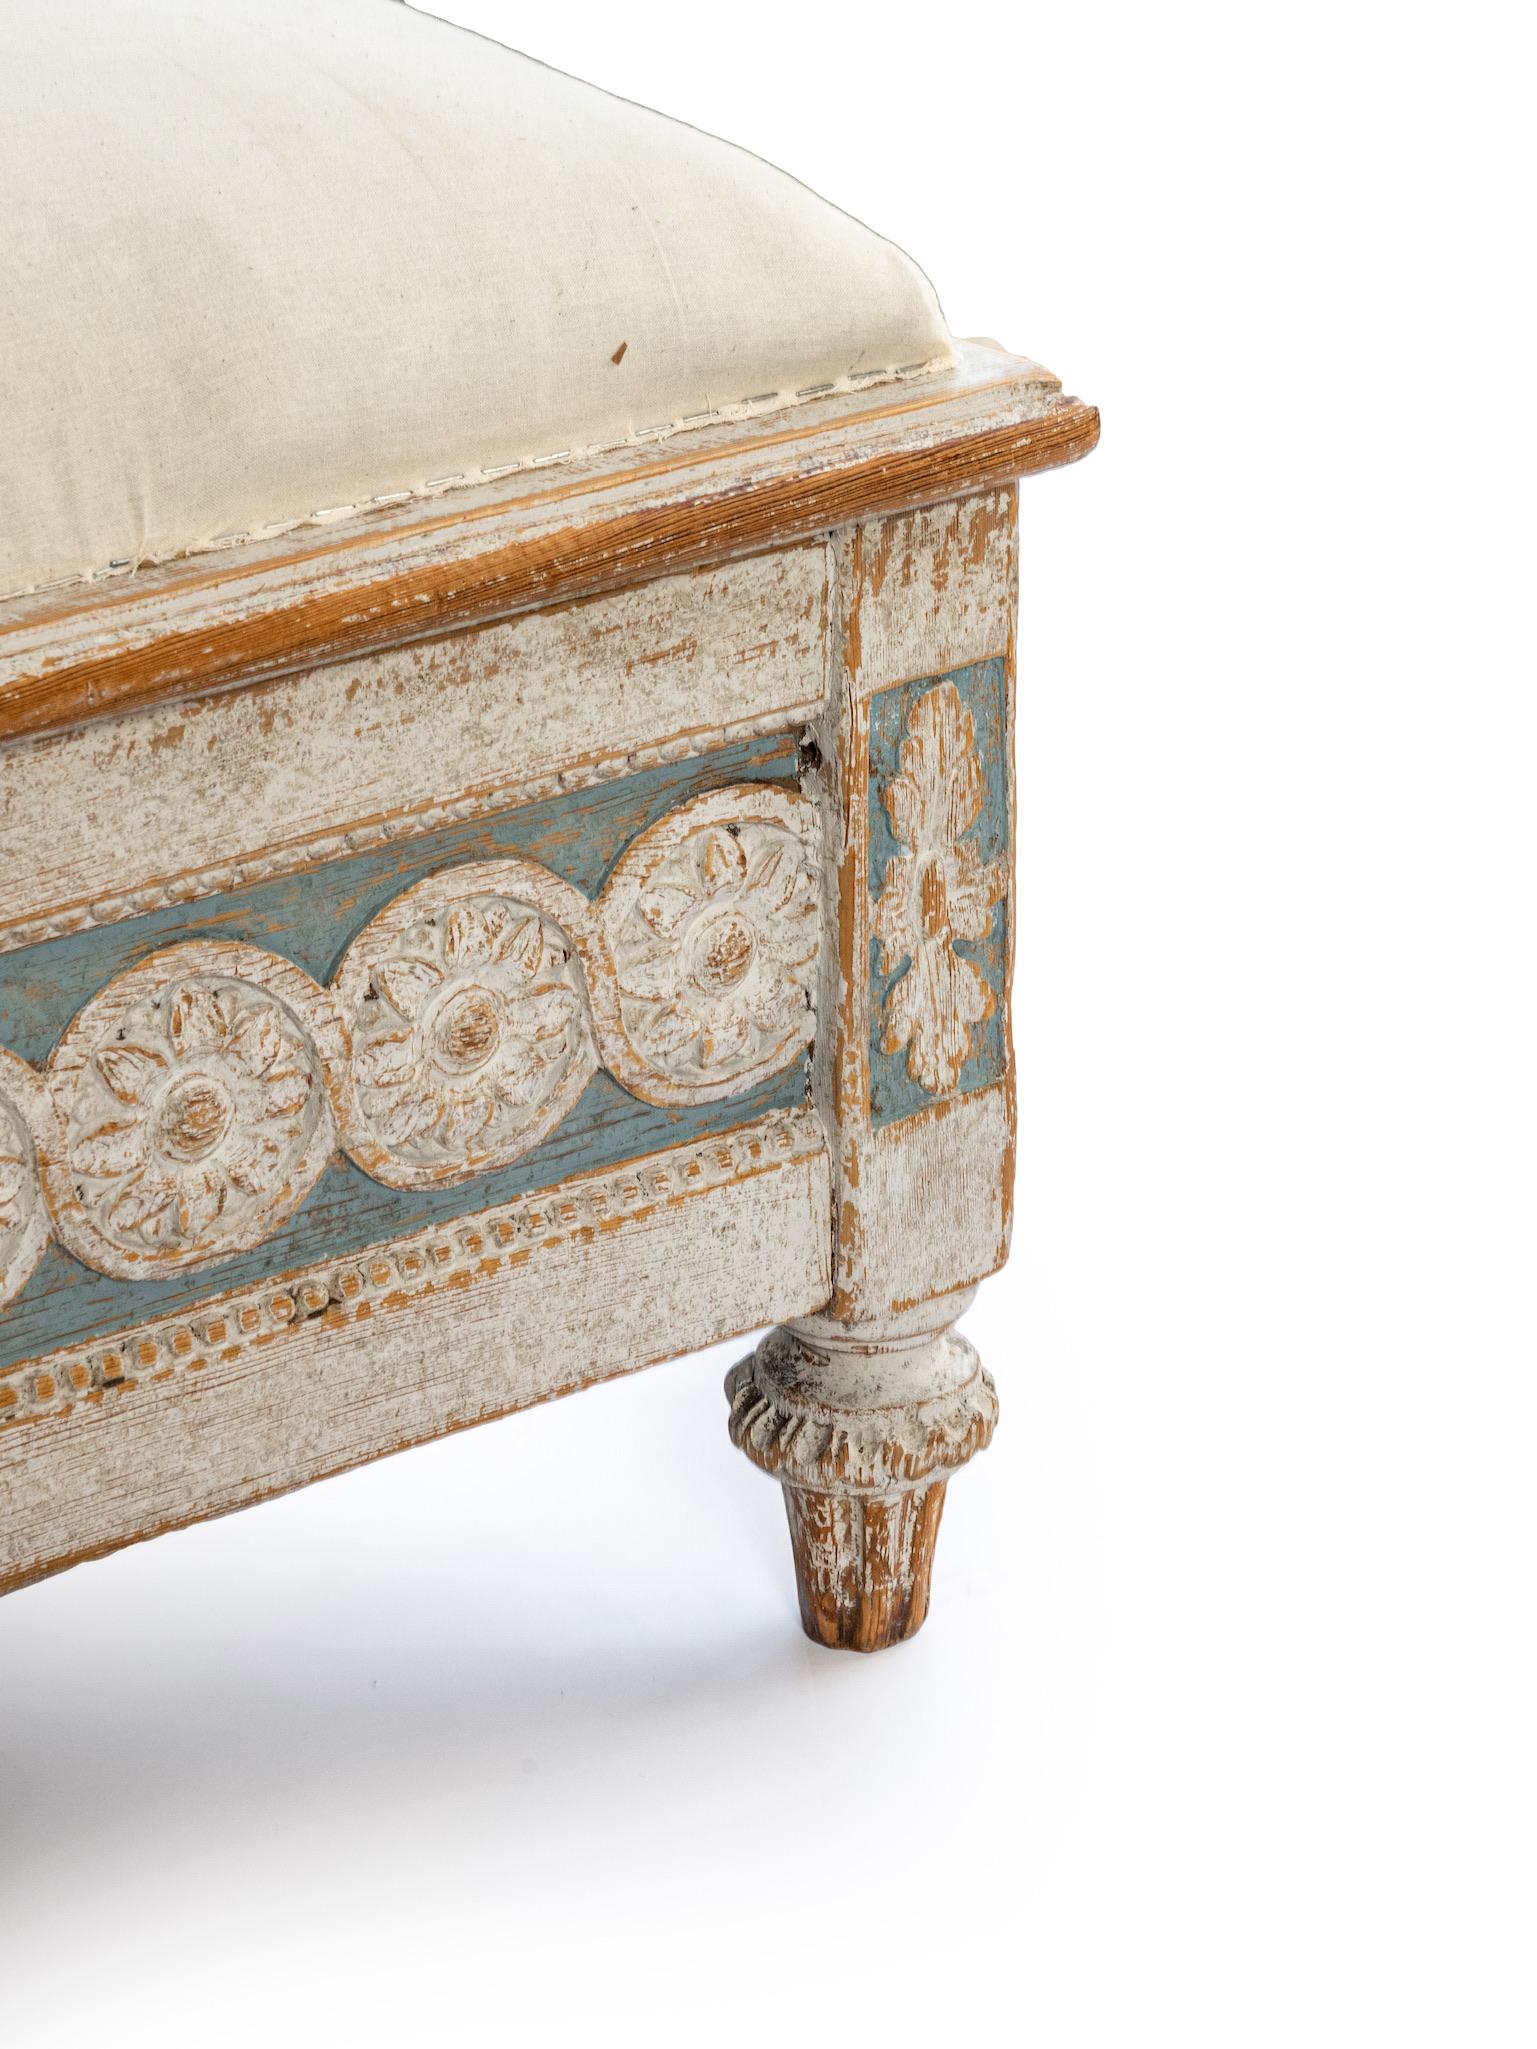 A period Gustavian bench in blue and light grey.